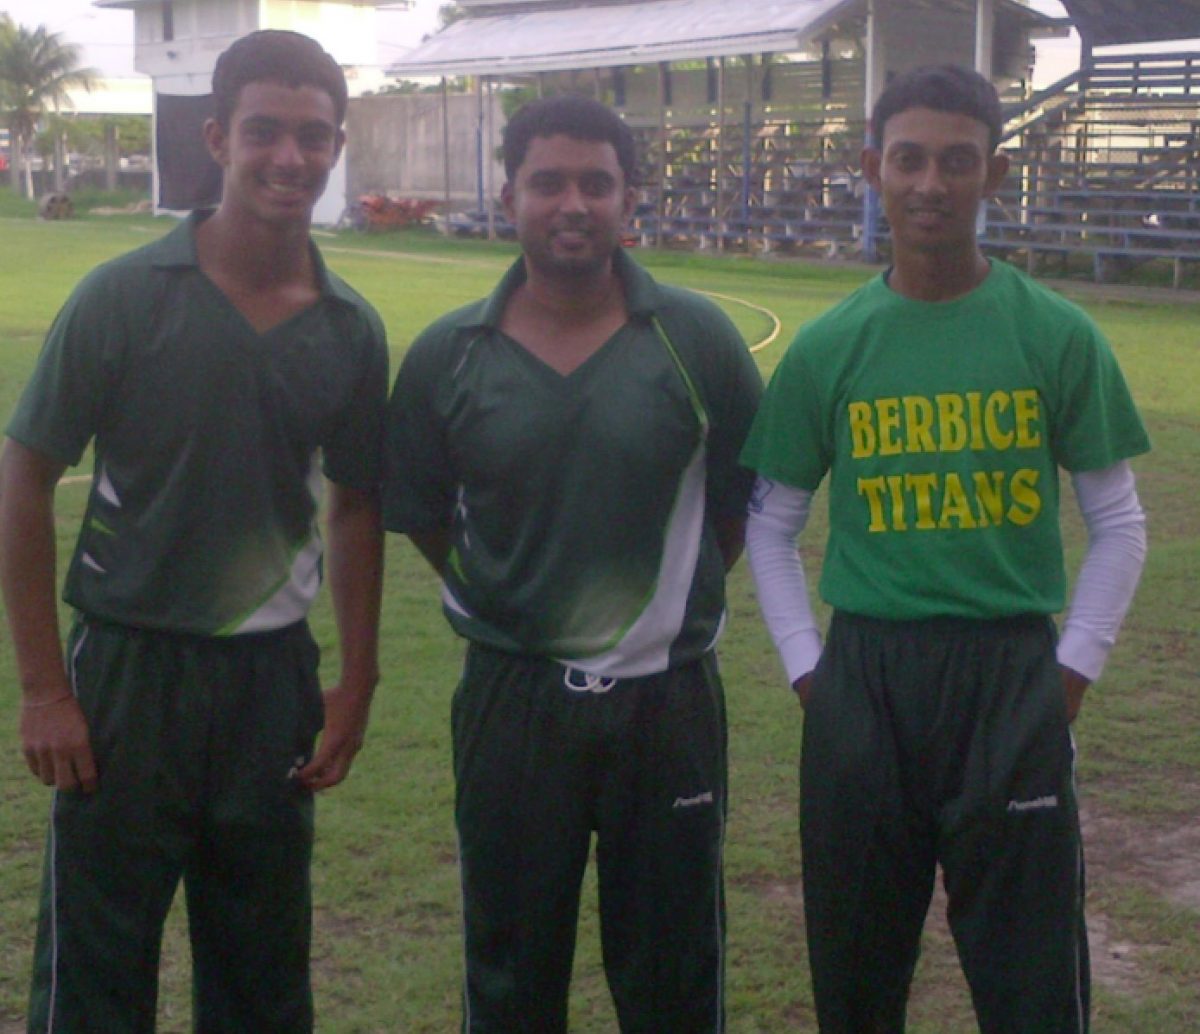 The three match-winners for Everest, Tagenarine Chanderpaul, Ryan Ramdass, centre and Troy Gonsalves, right.